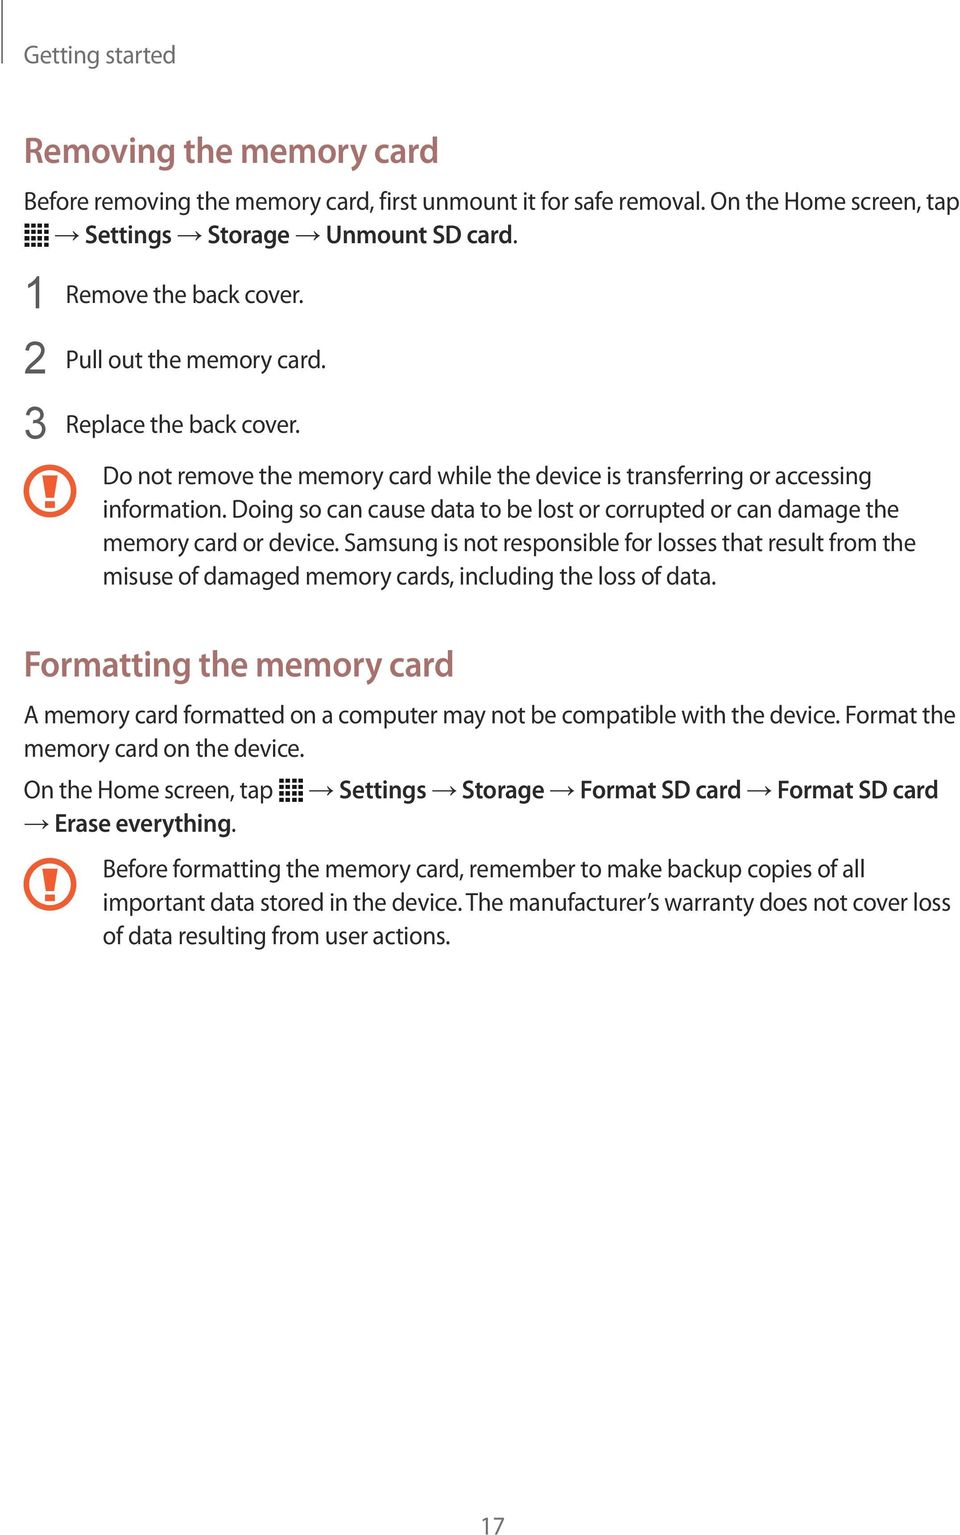 Doing so can cause data to be lost or corrupted or can damage the memory card or device.